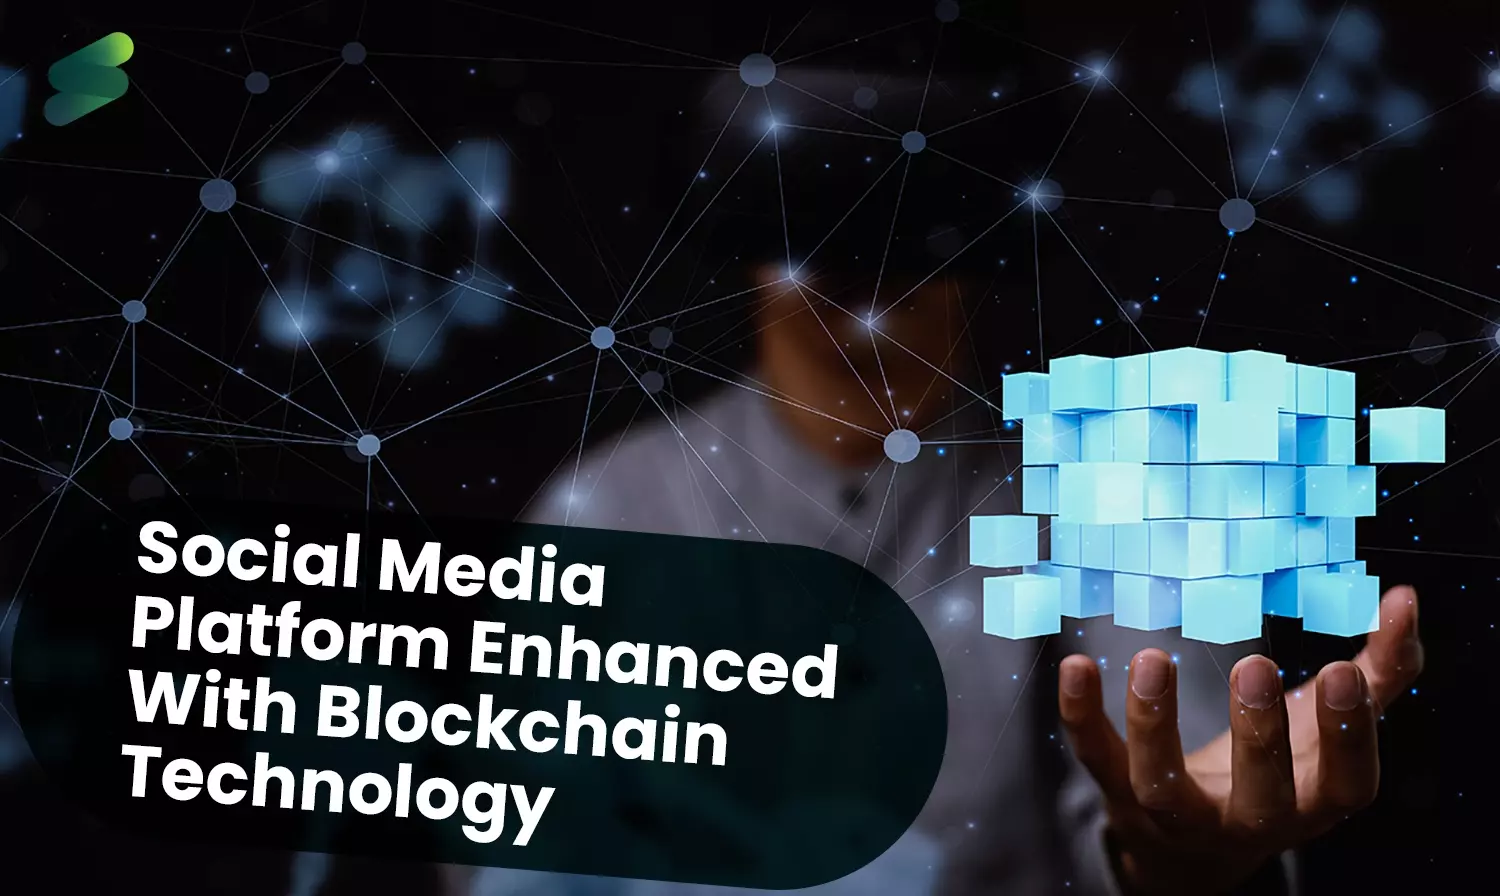  How a Social Media Platform Enhanced With Blockchain Technology Can Benefit Users